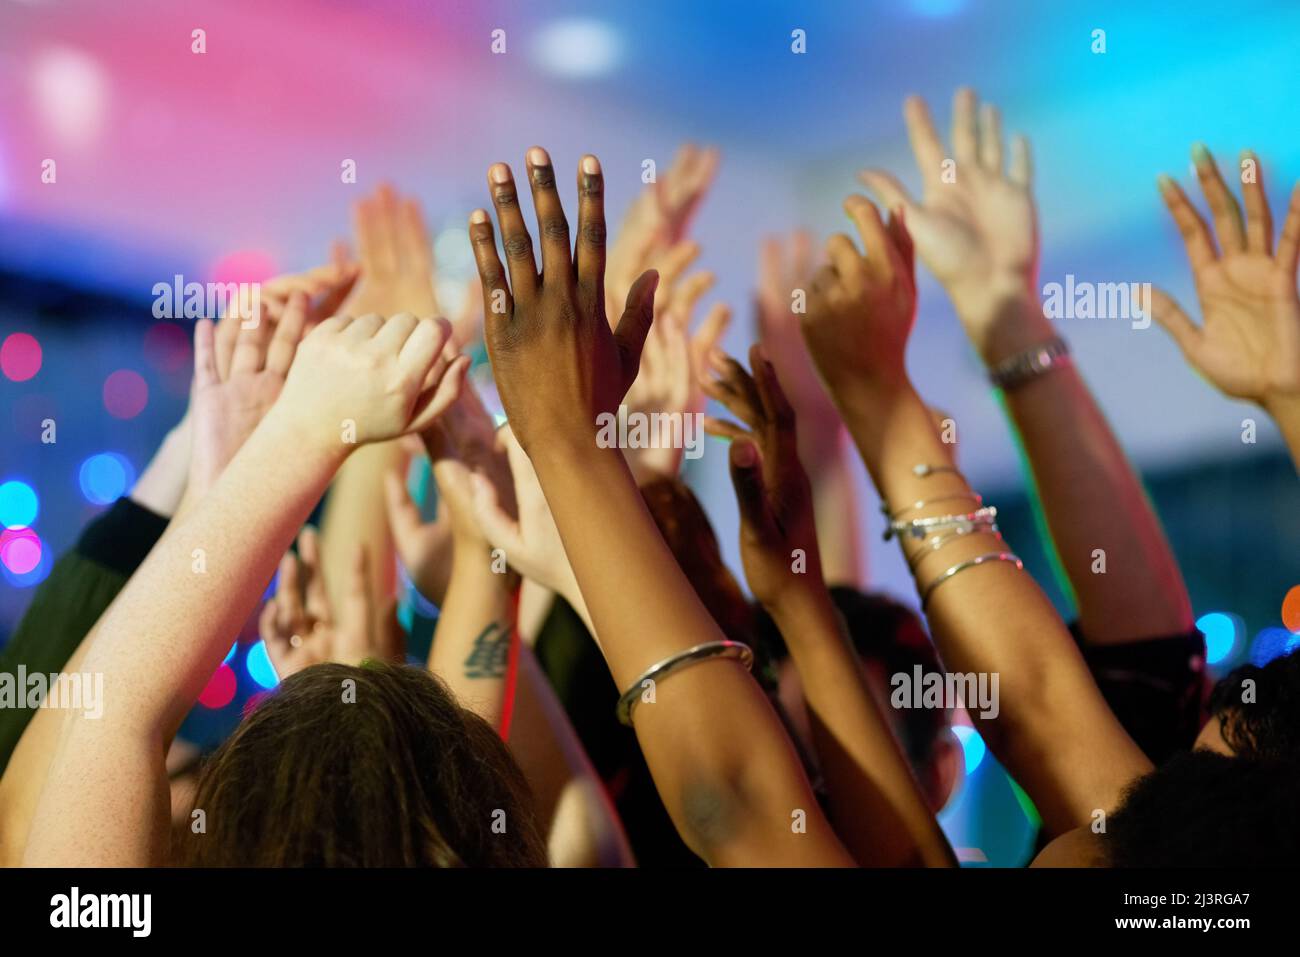 Raise the roof. Shot of a group of friends dancing with their arms raised in a nightclub. Stock Photo